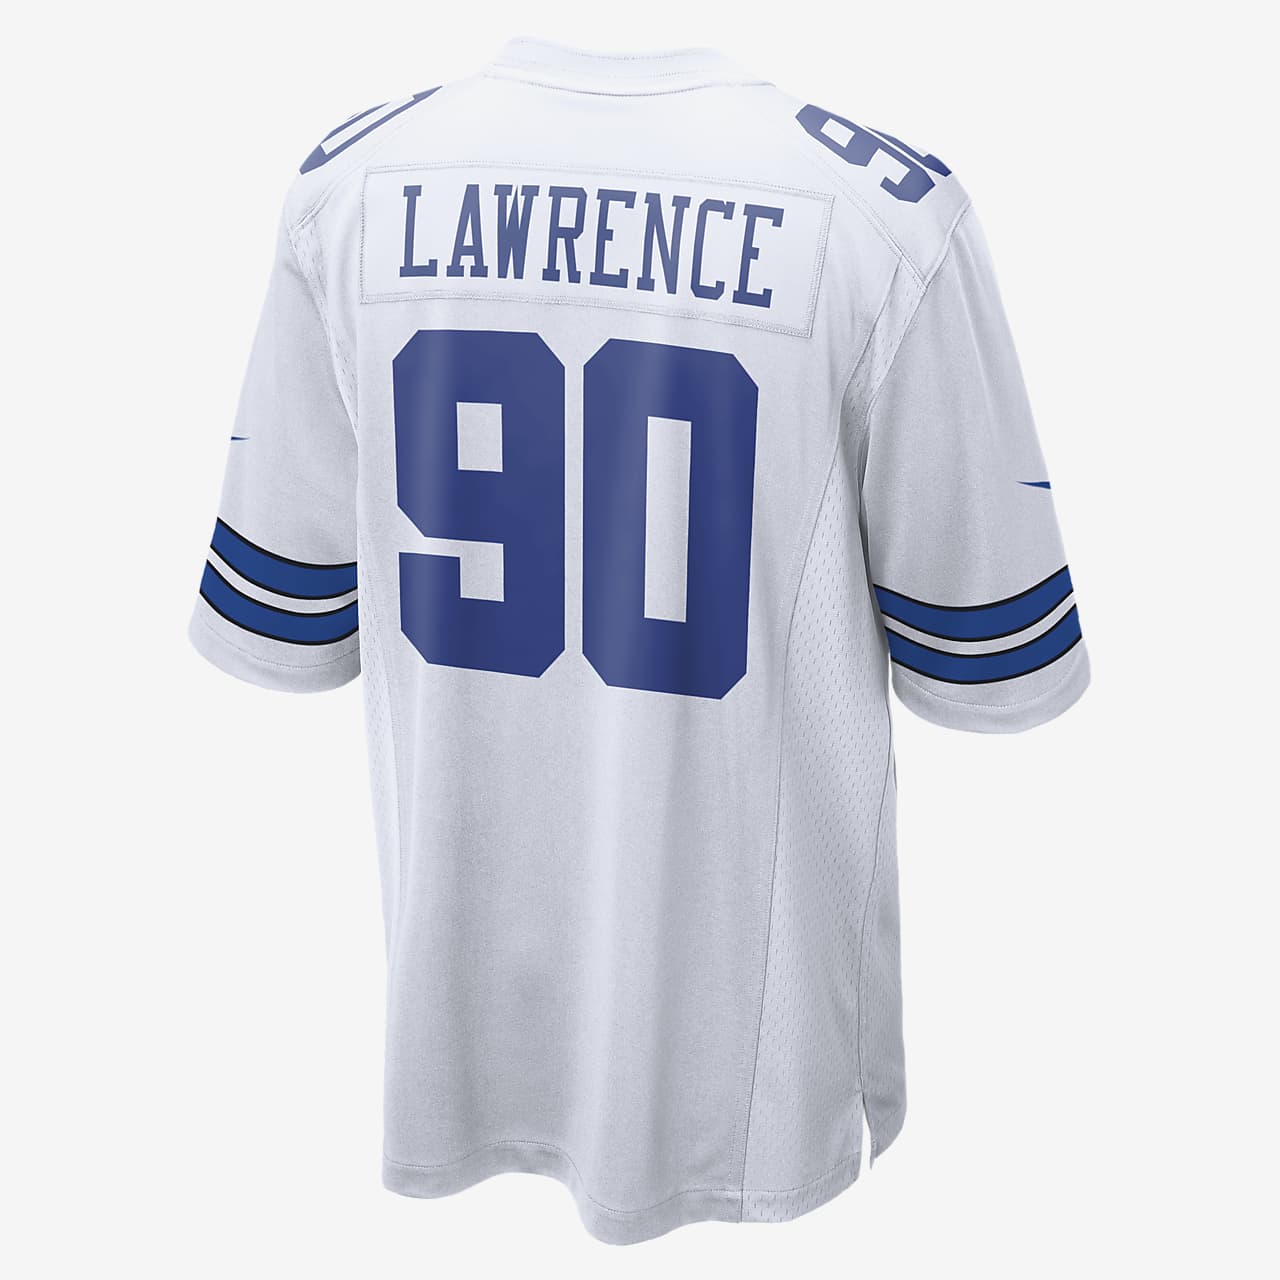 lawrence cowboys jersey